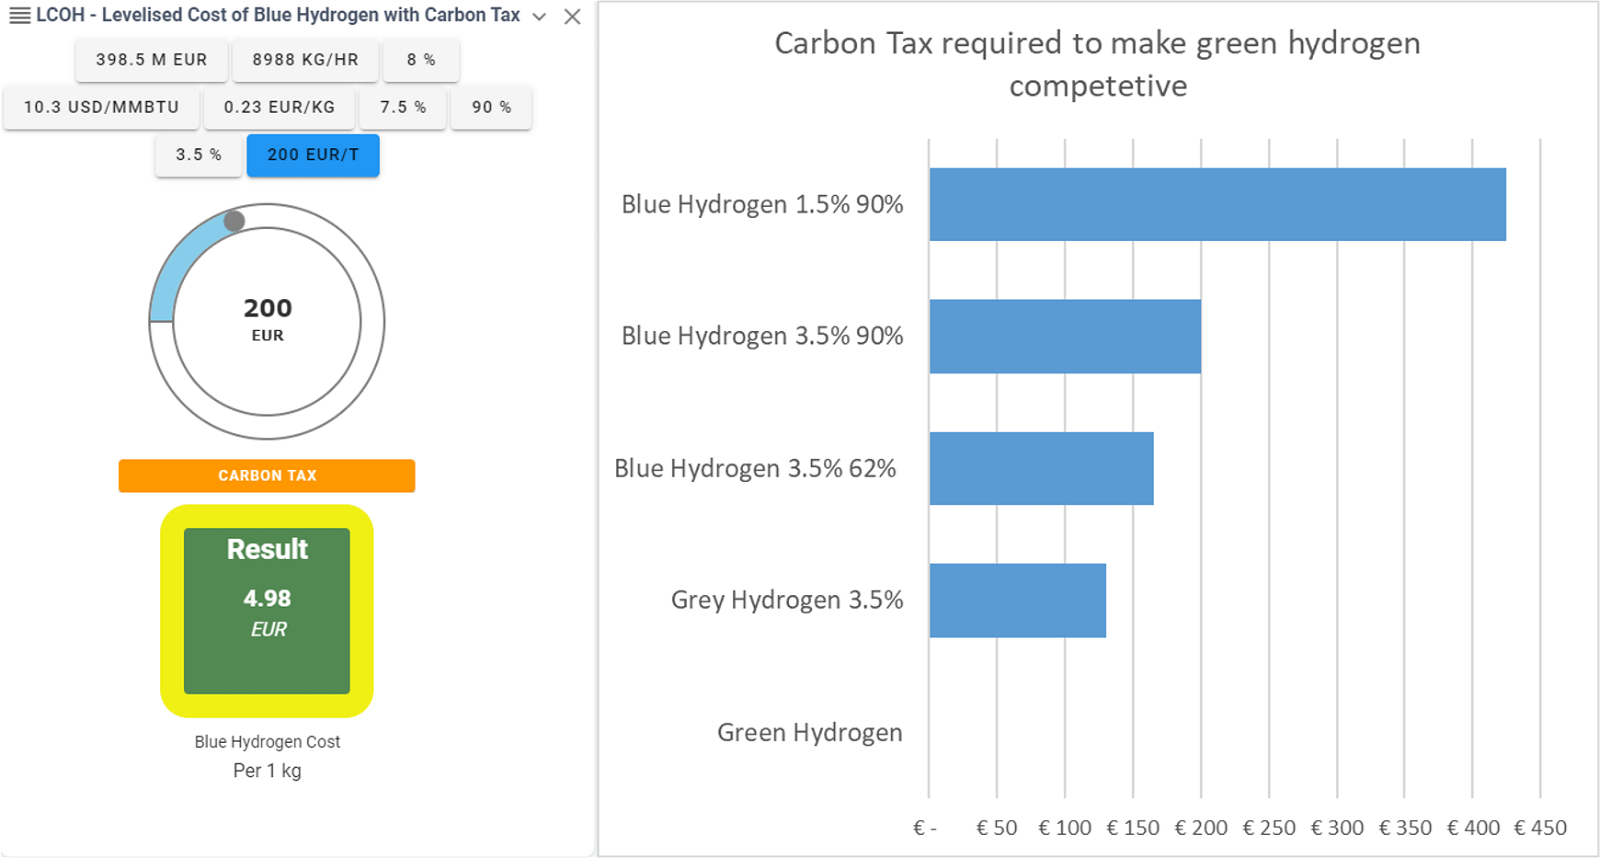 https://keynumbers.com/#/public/model/lcoh-levelised-cost-of-blue-hydrogen-with-carbon-tax-7659